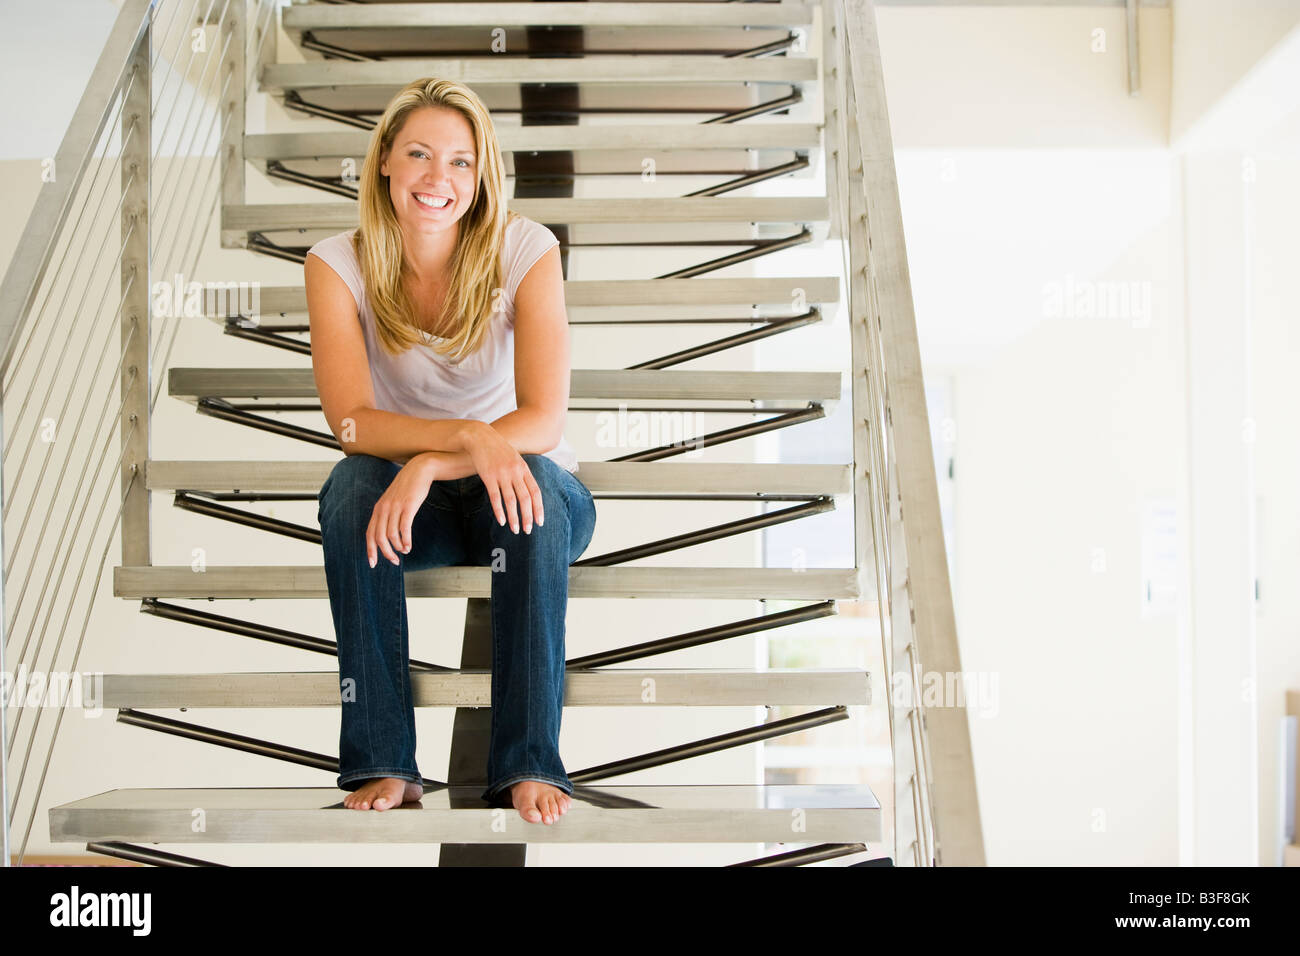 Woman sitting on stairs smiling Banque D'Images